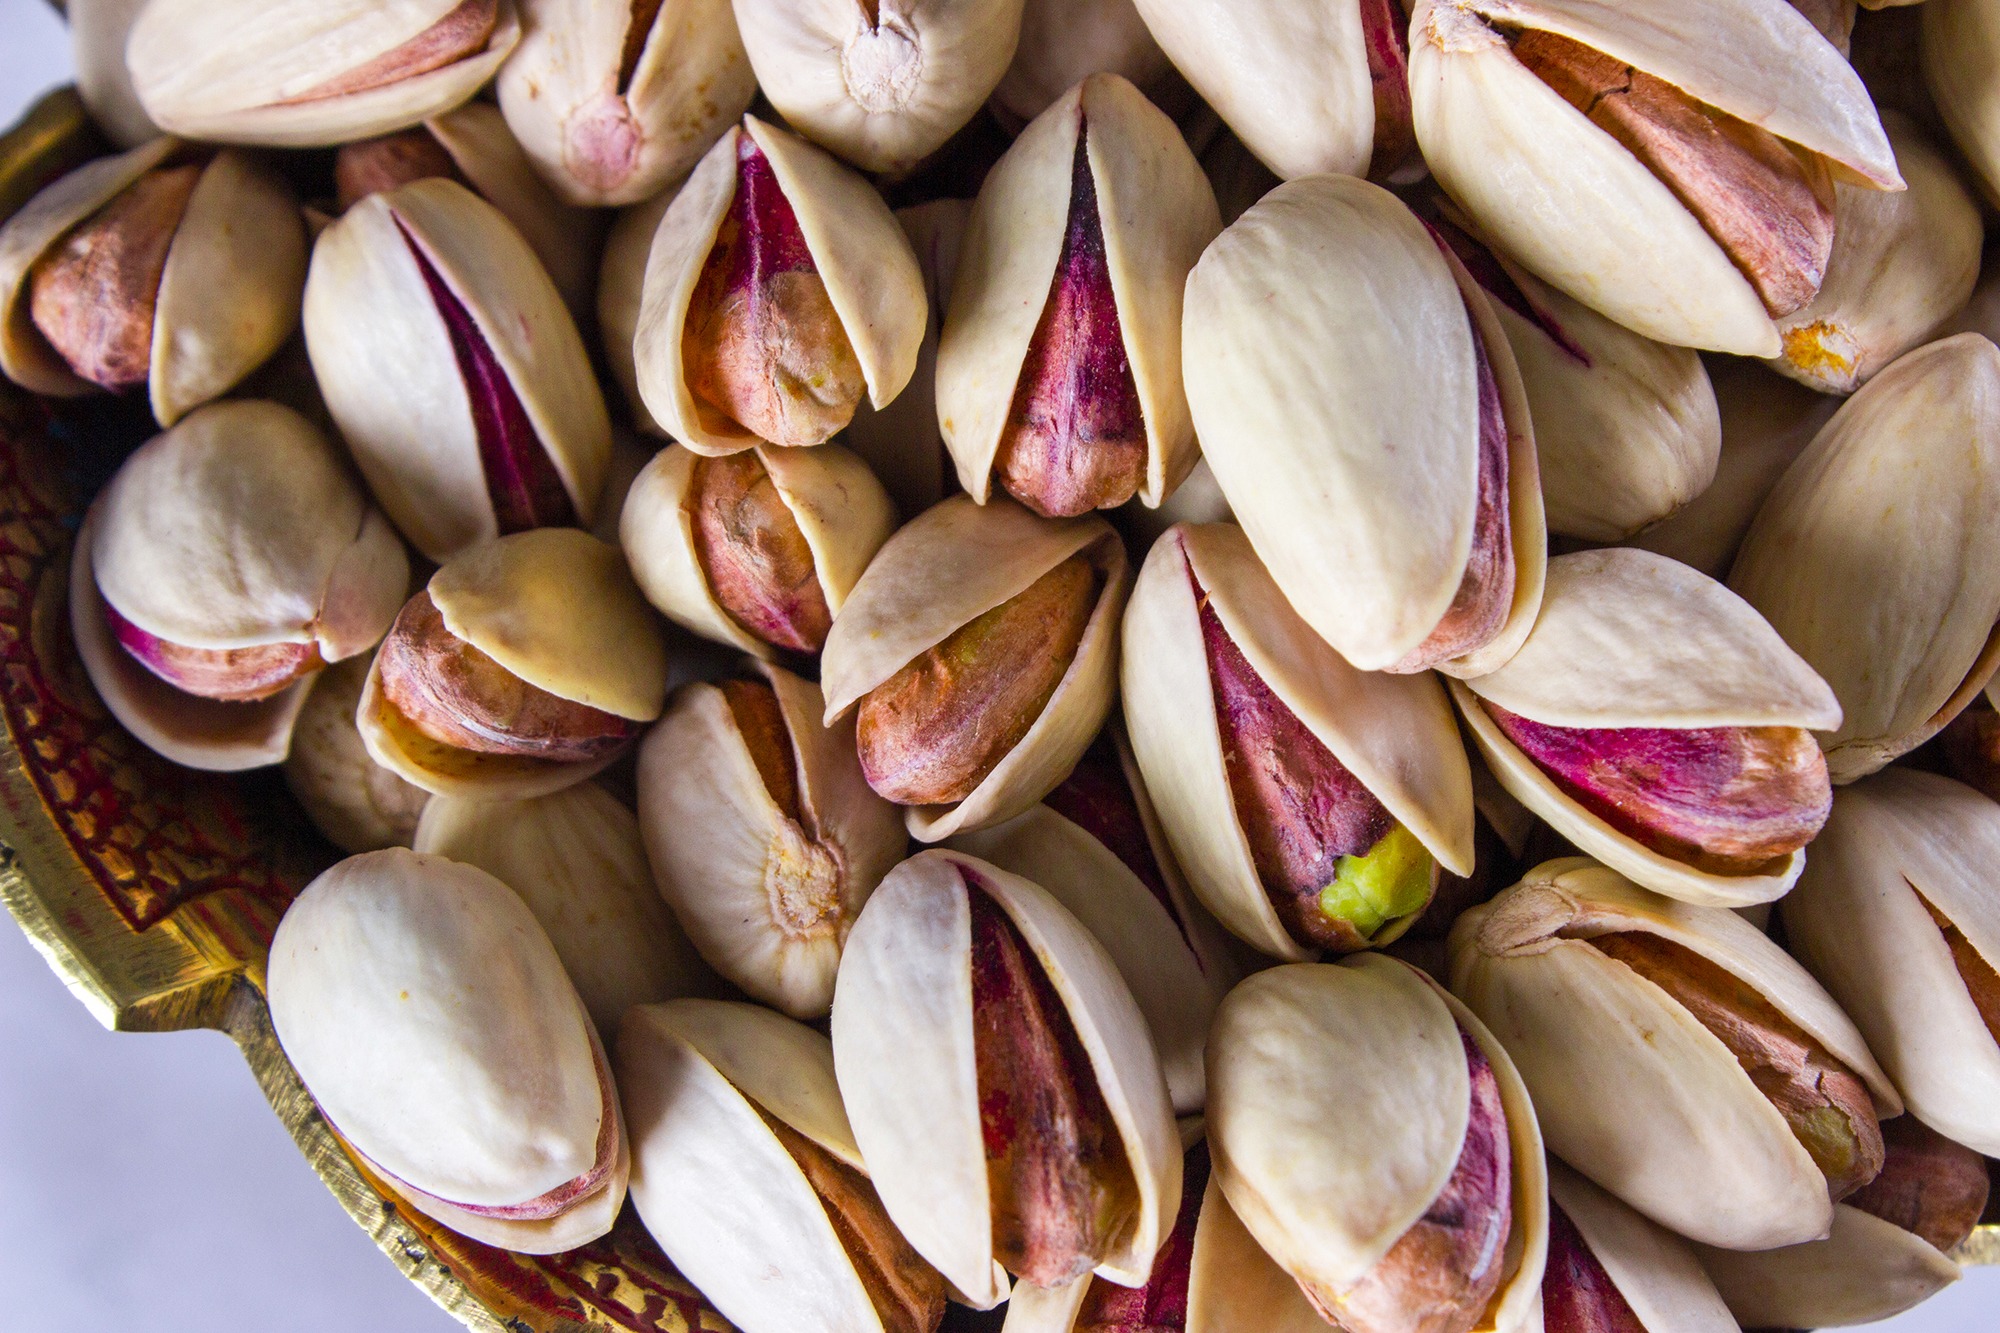 Persian Pistachios - The price of Persian Pistachios - Cheap Purchase - Nutex Company